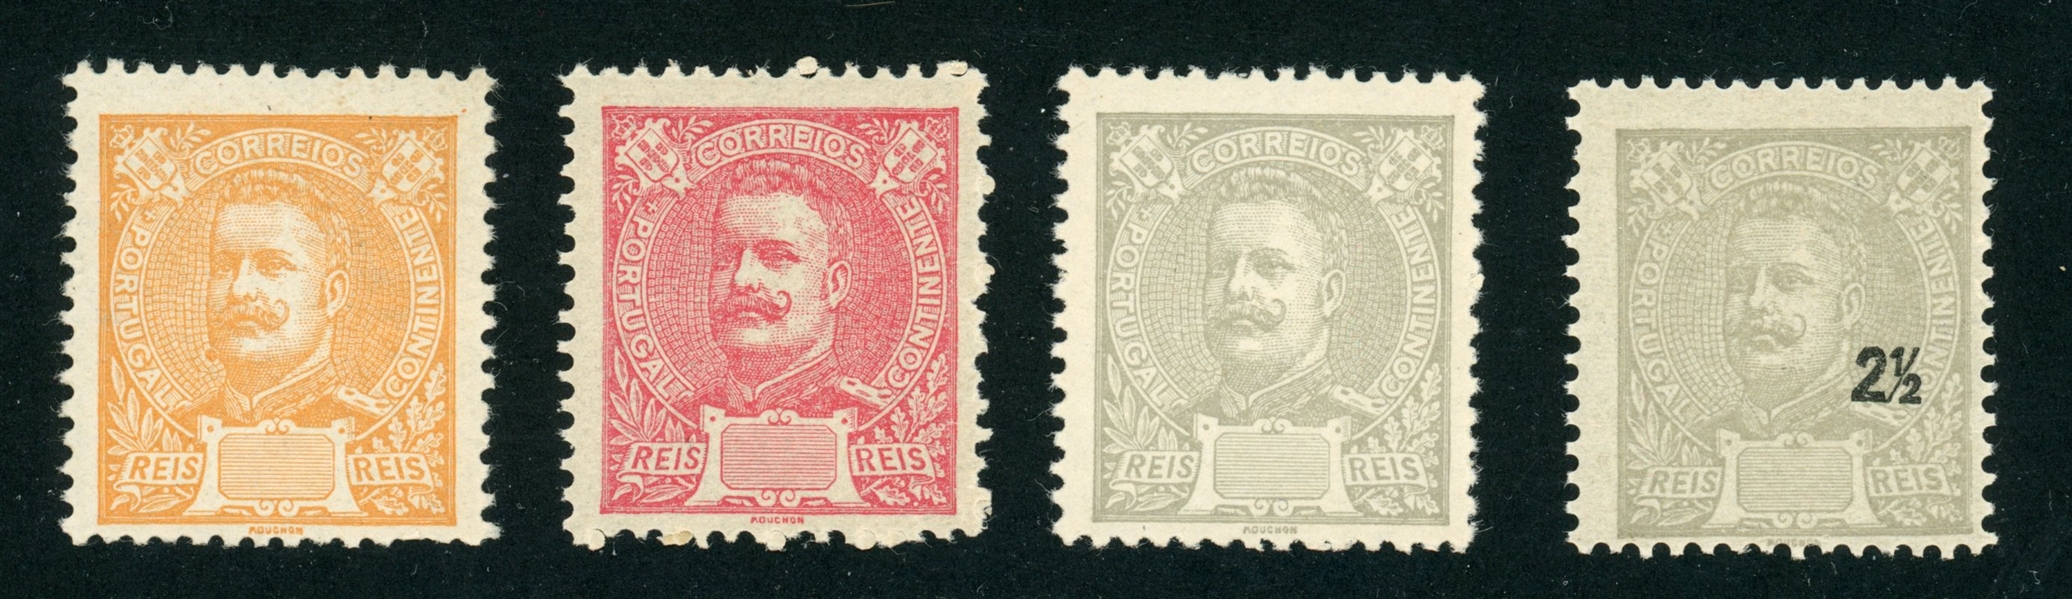 Portugal 1895 Issue King Carlos Issue - No Values or Shifted (Est $50-100)